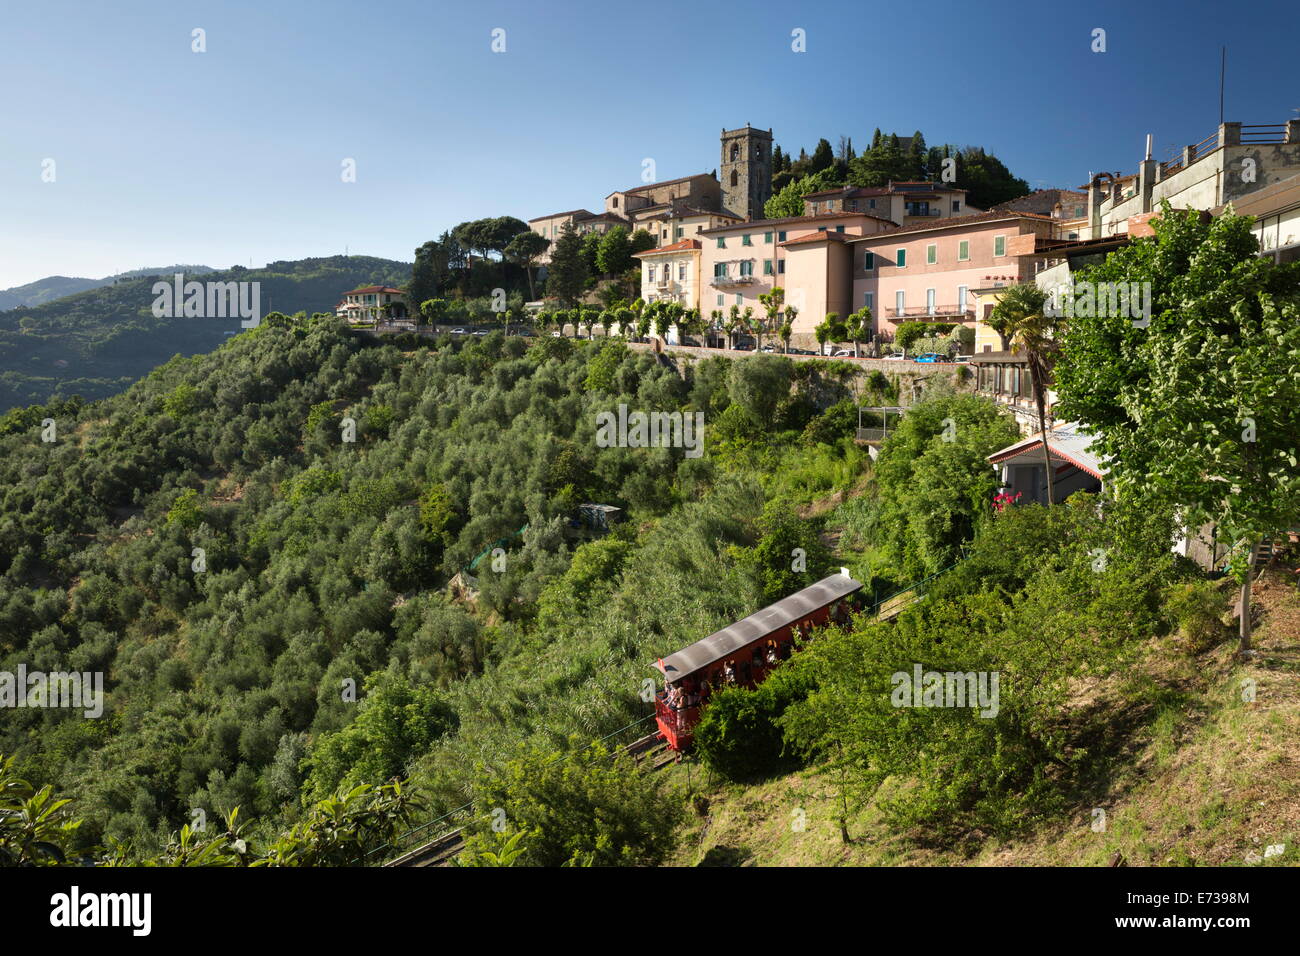 Funicular below hill top town, Montecatini Alto, Tuscany, Italy, Europe ...